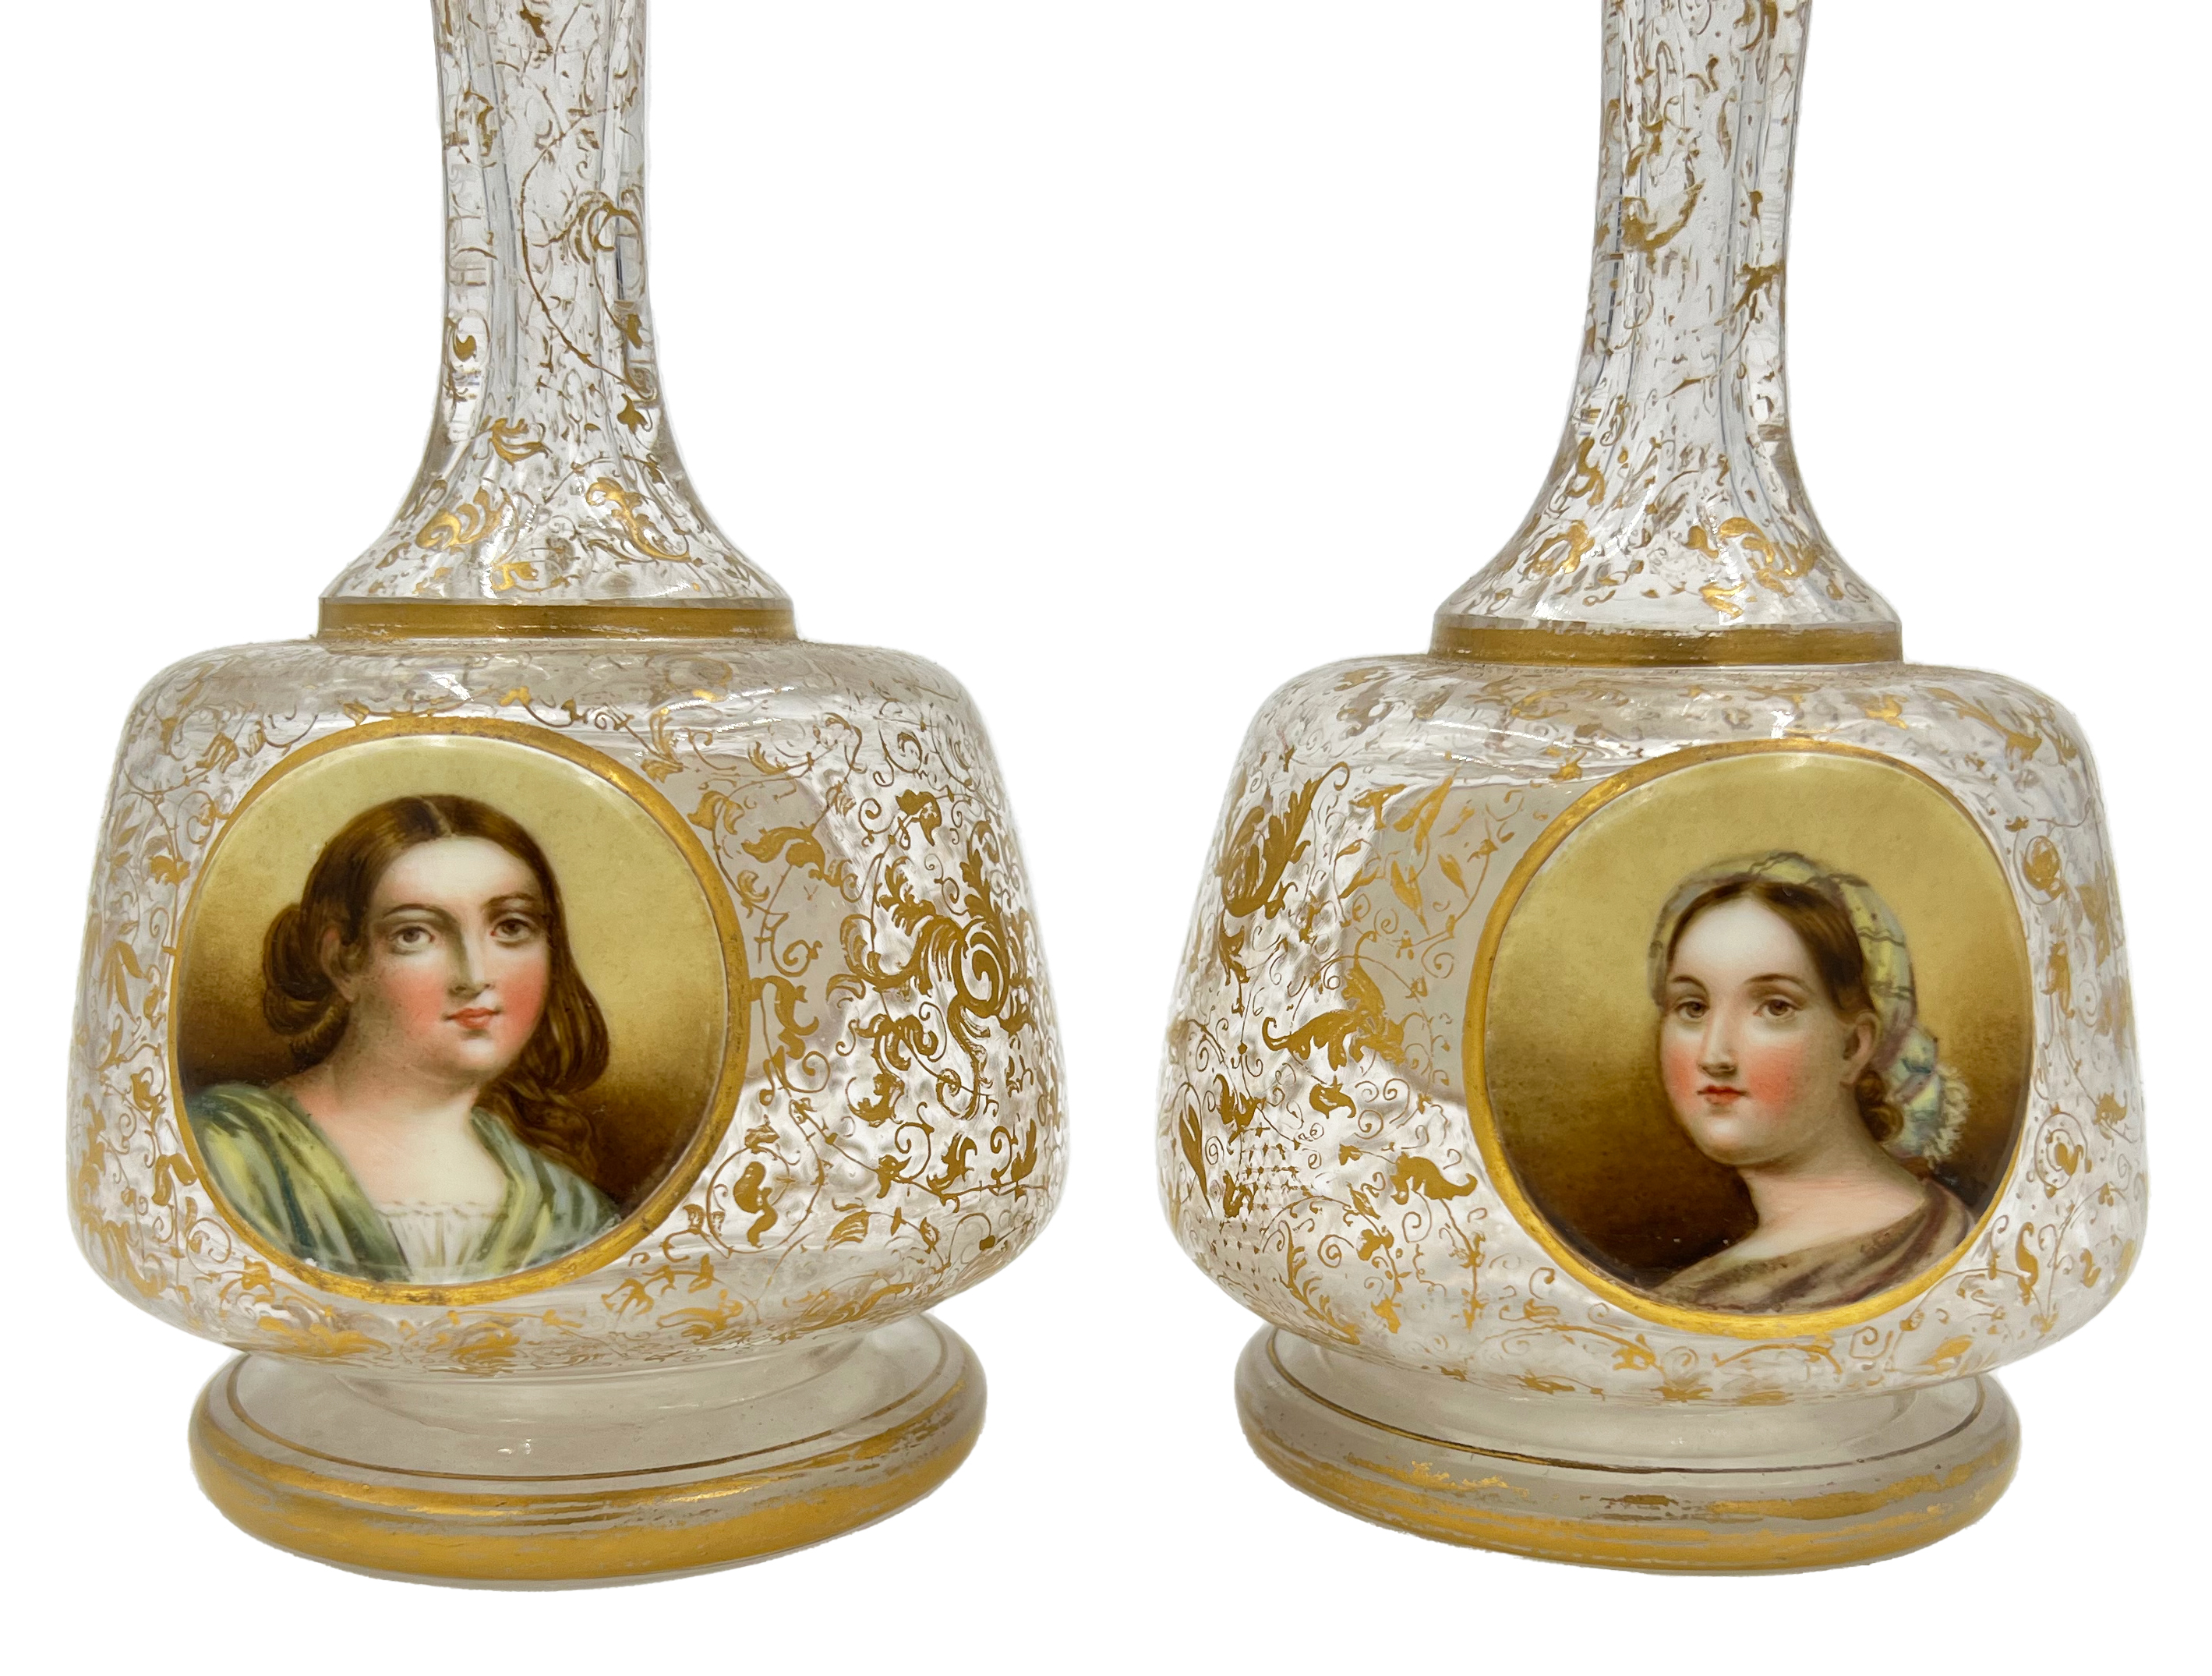 PAIR OF 19TH CENTURY CLEAR BOHEMIAN GLASS VASES - Image 2 of 3